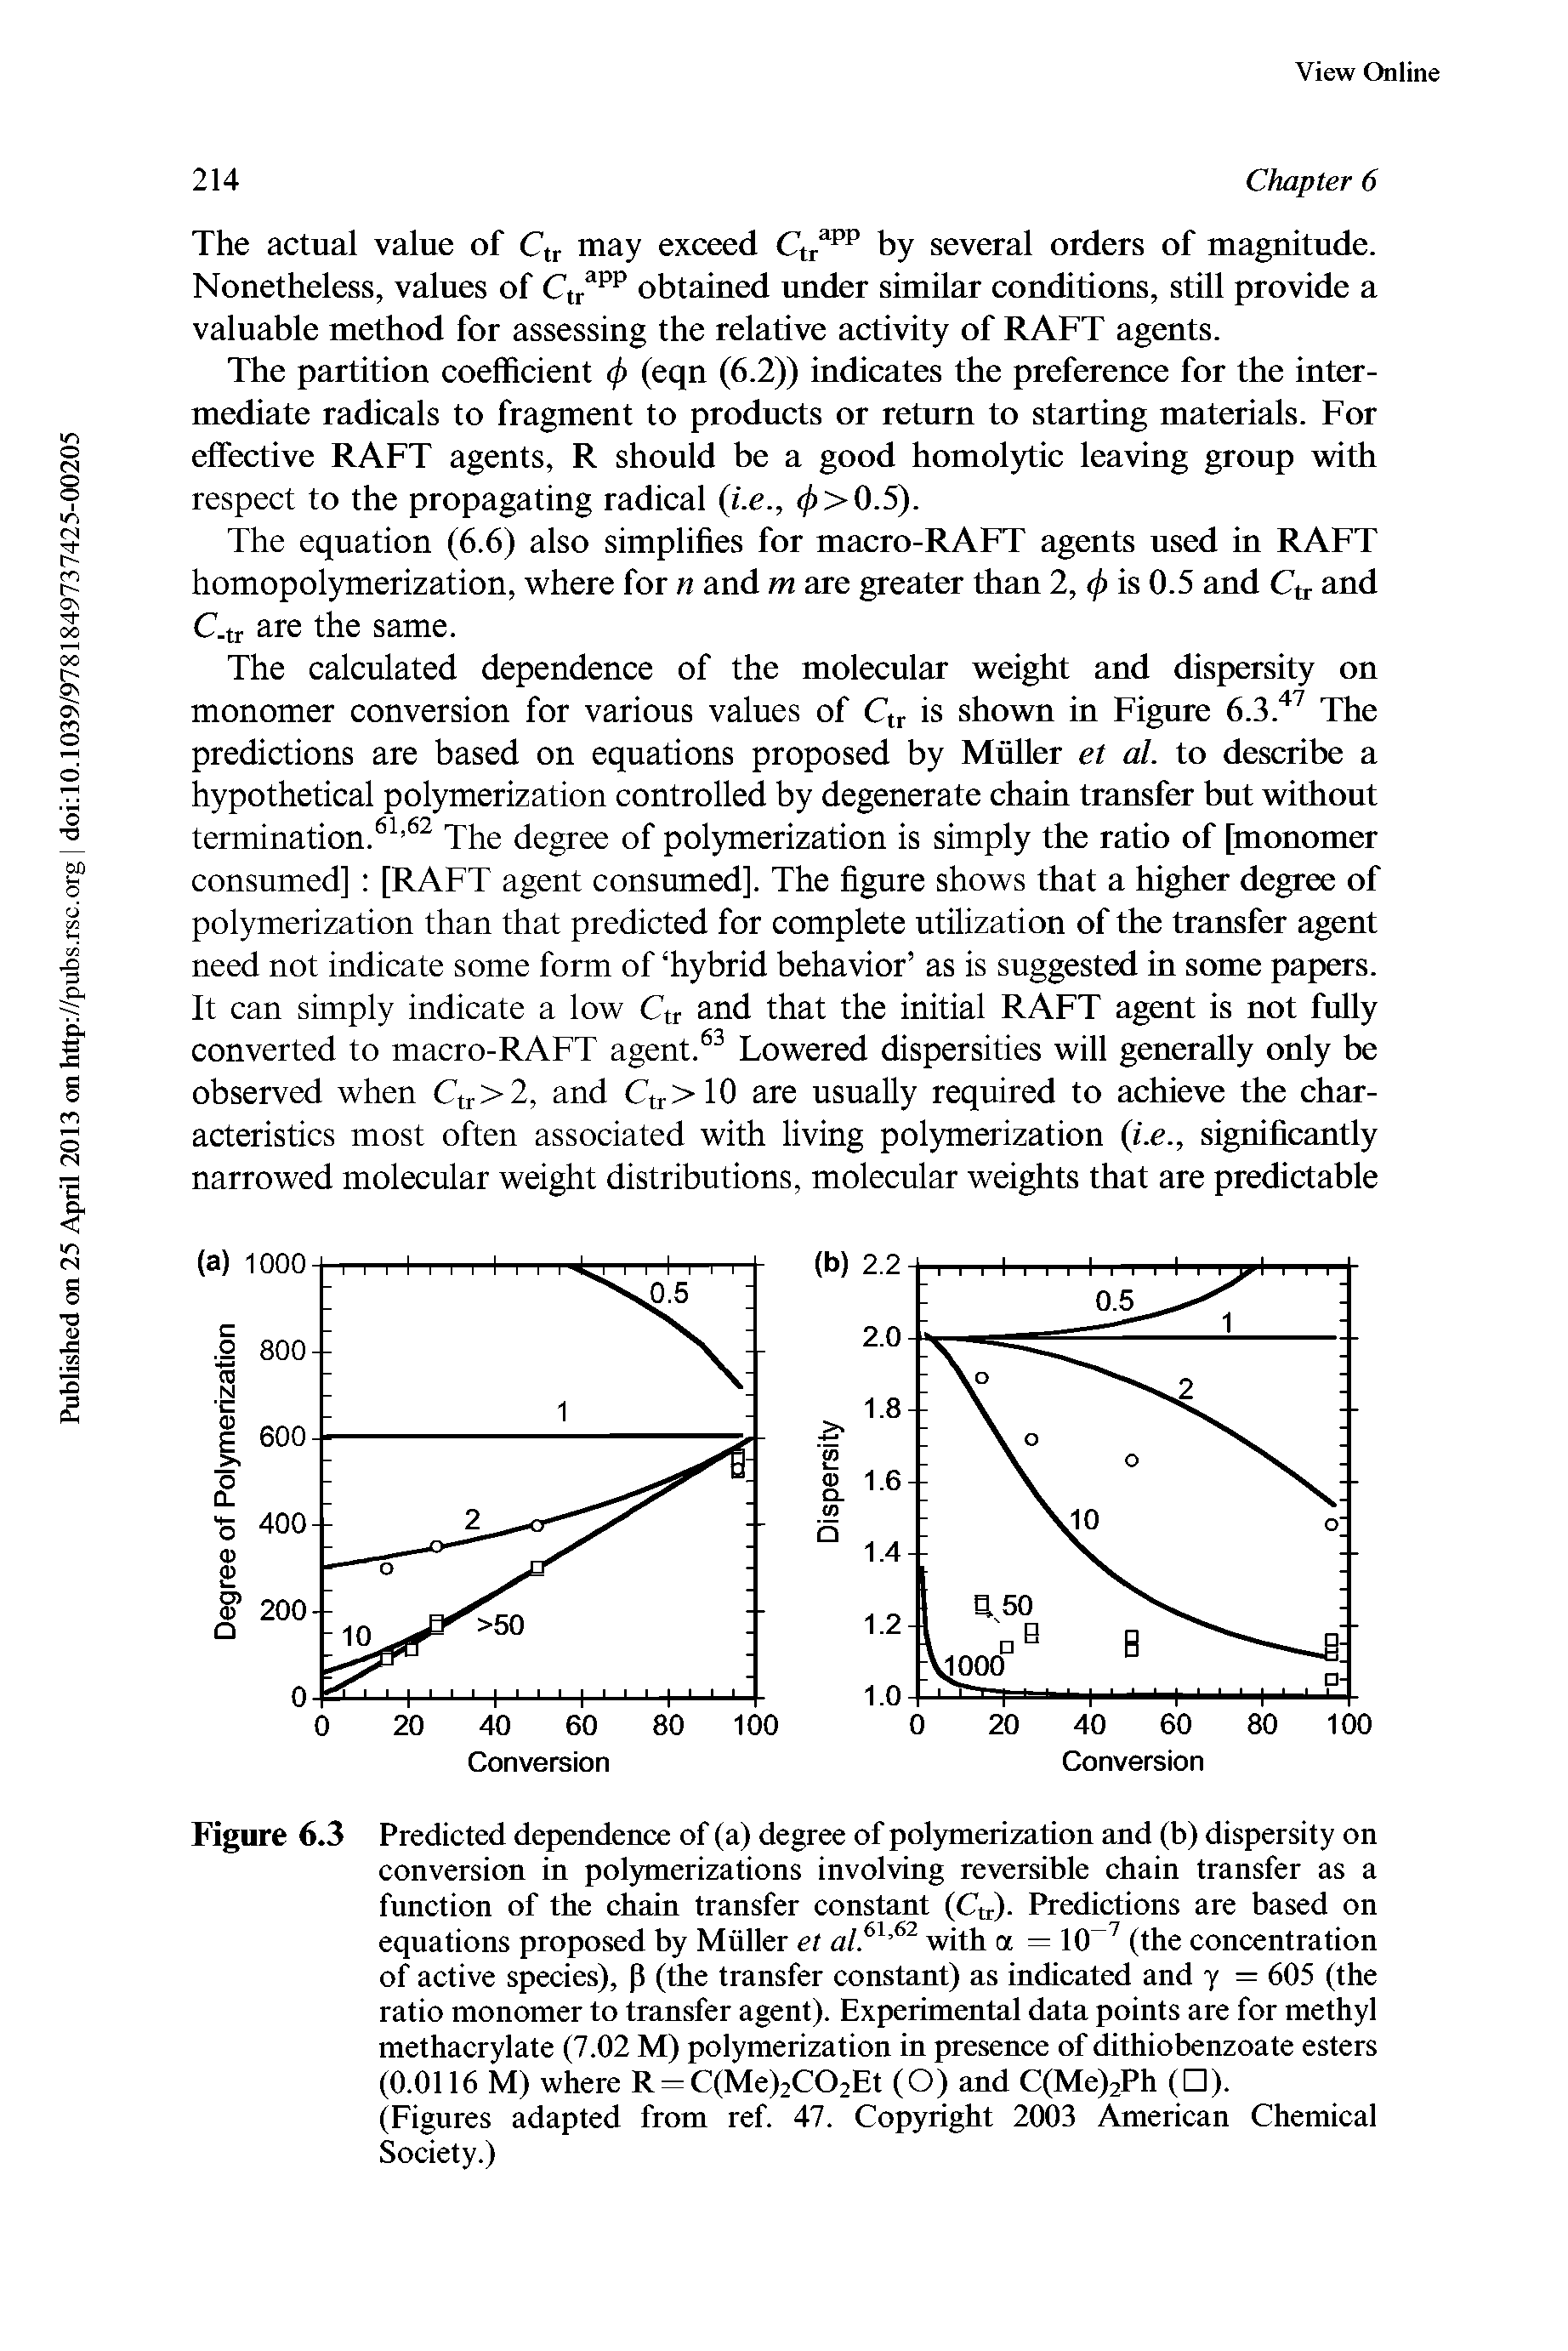 Figure 6.3 Predicted dependence of (a) degree of polymerization and (b) dispersity on conversion in pol5merizations involving reversible chain transfer as a function of the chain transfer constant (Ctr). Predictions are based on equations proposed by Muller et with a = 10 (the concentration...